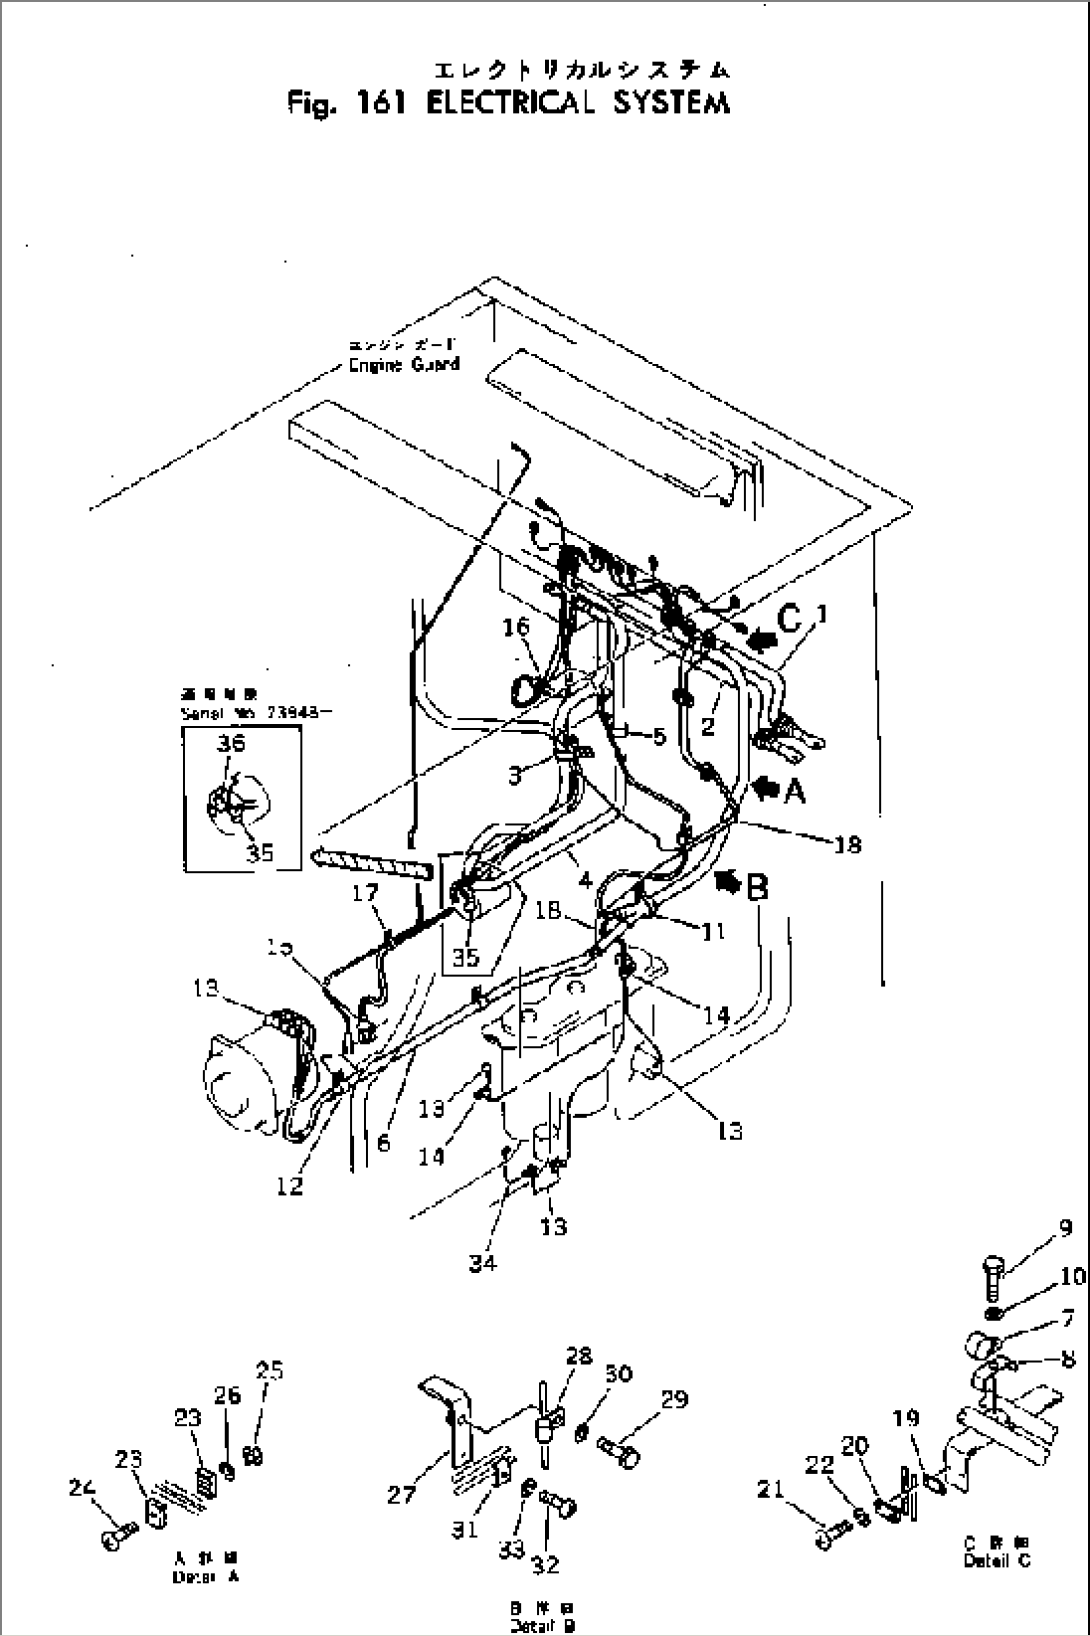 ELECTRICAL SYSTEM